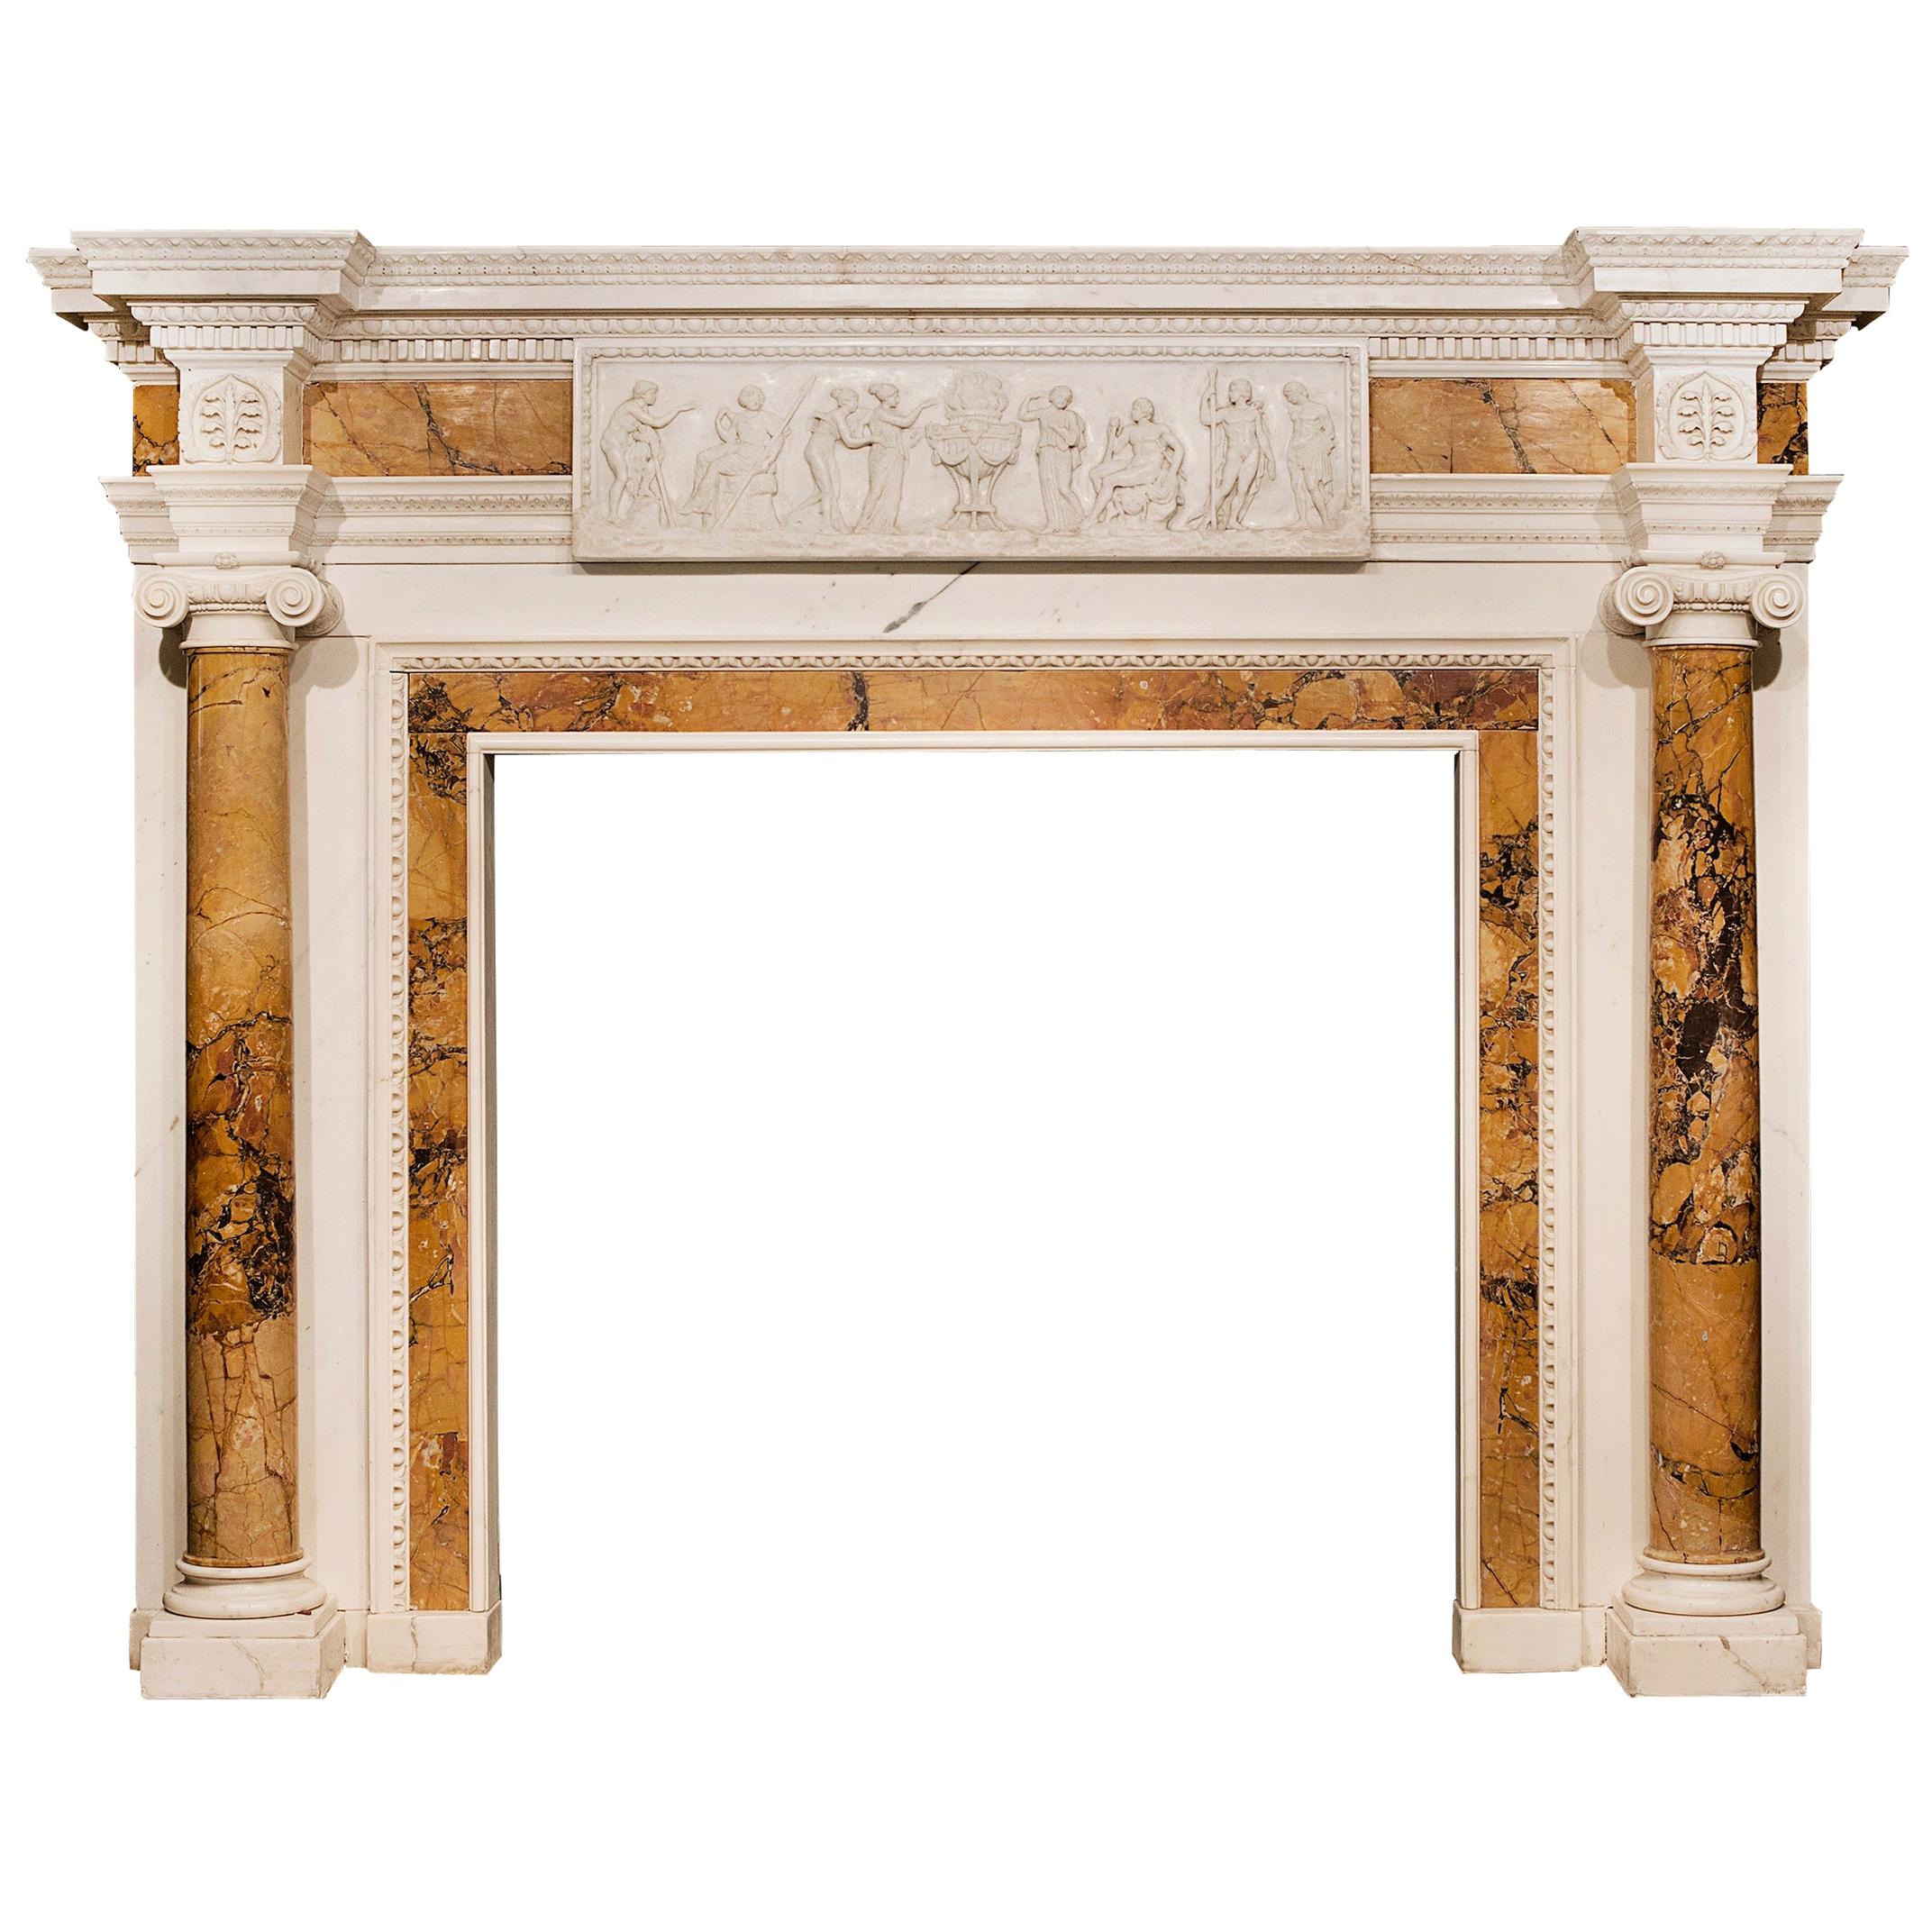 Important English 18th Century Statuary and Sienna Marble Fireplace